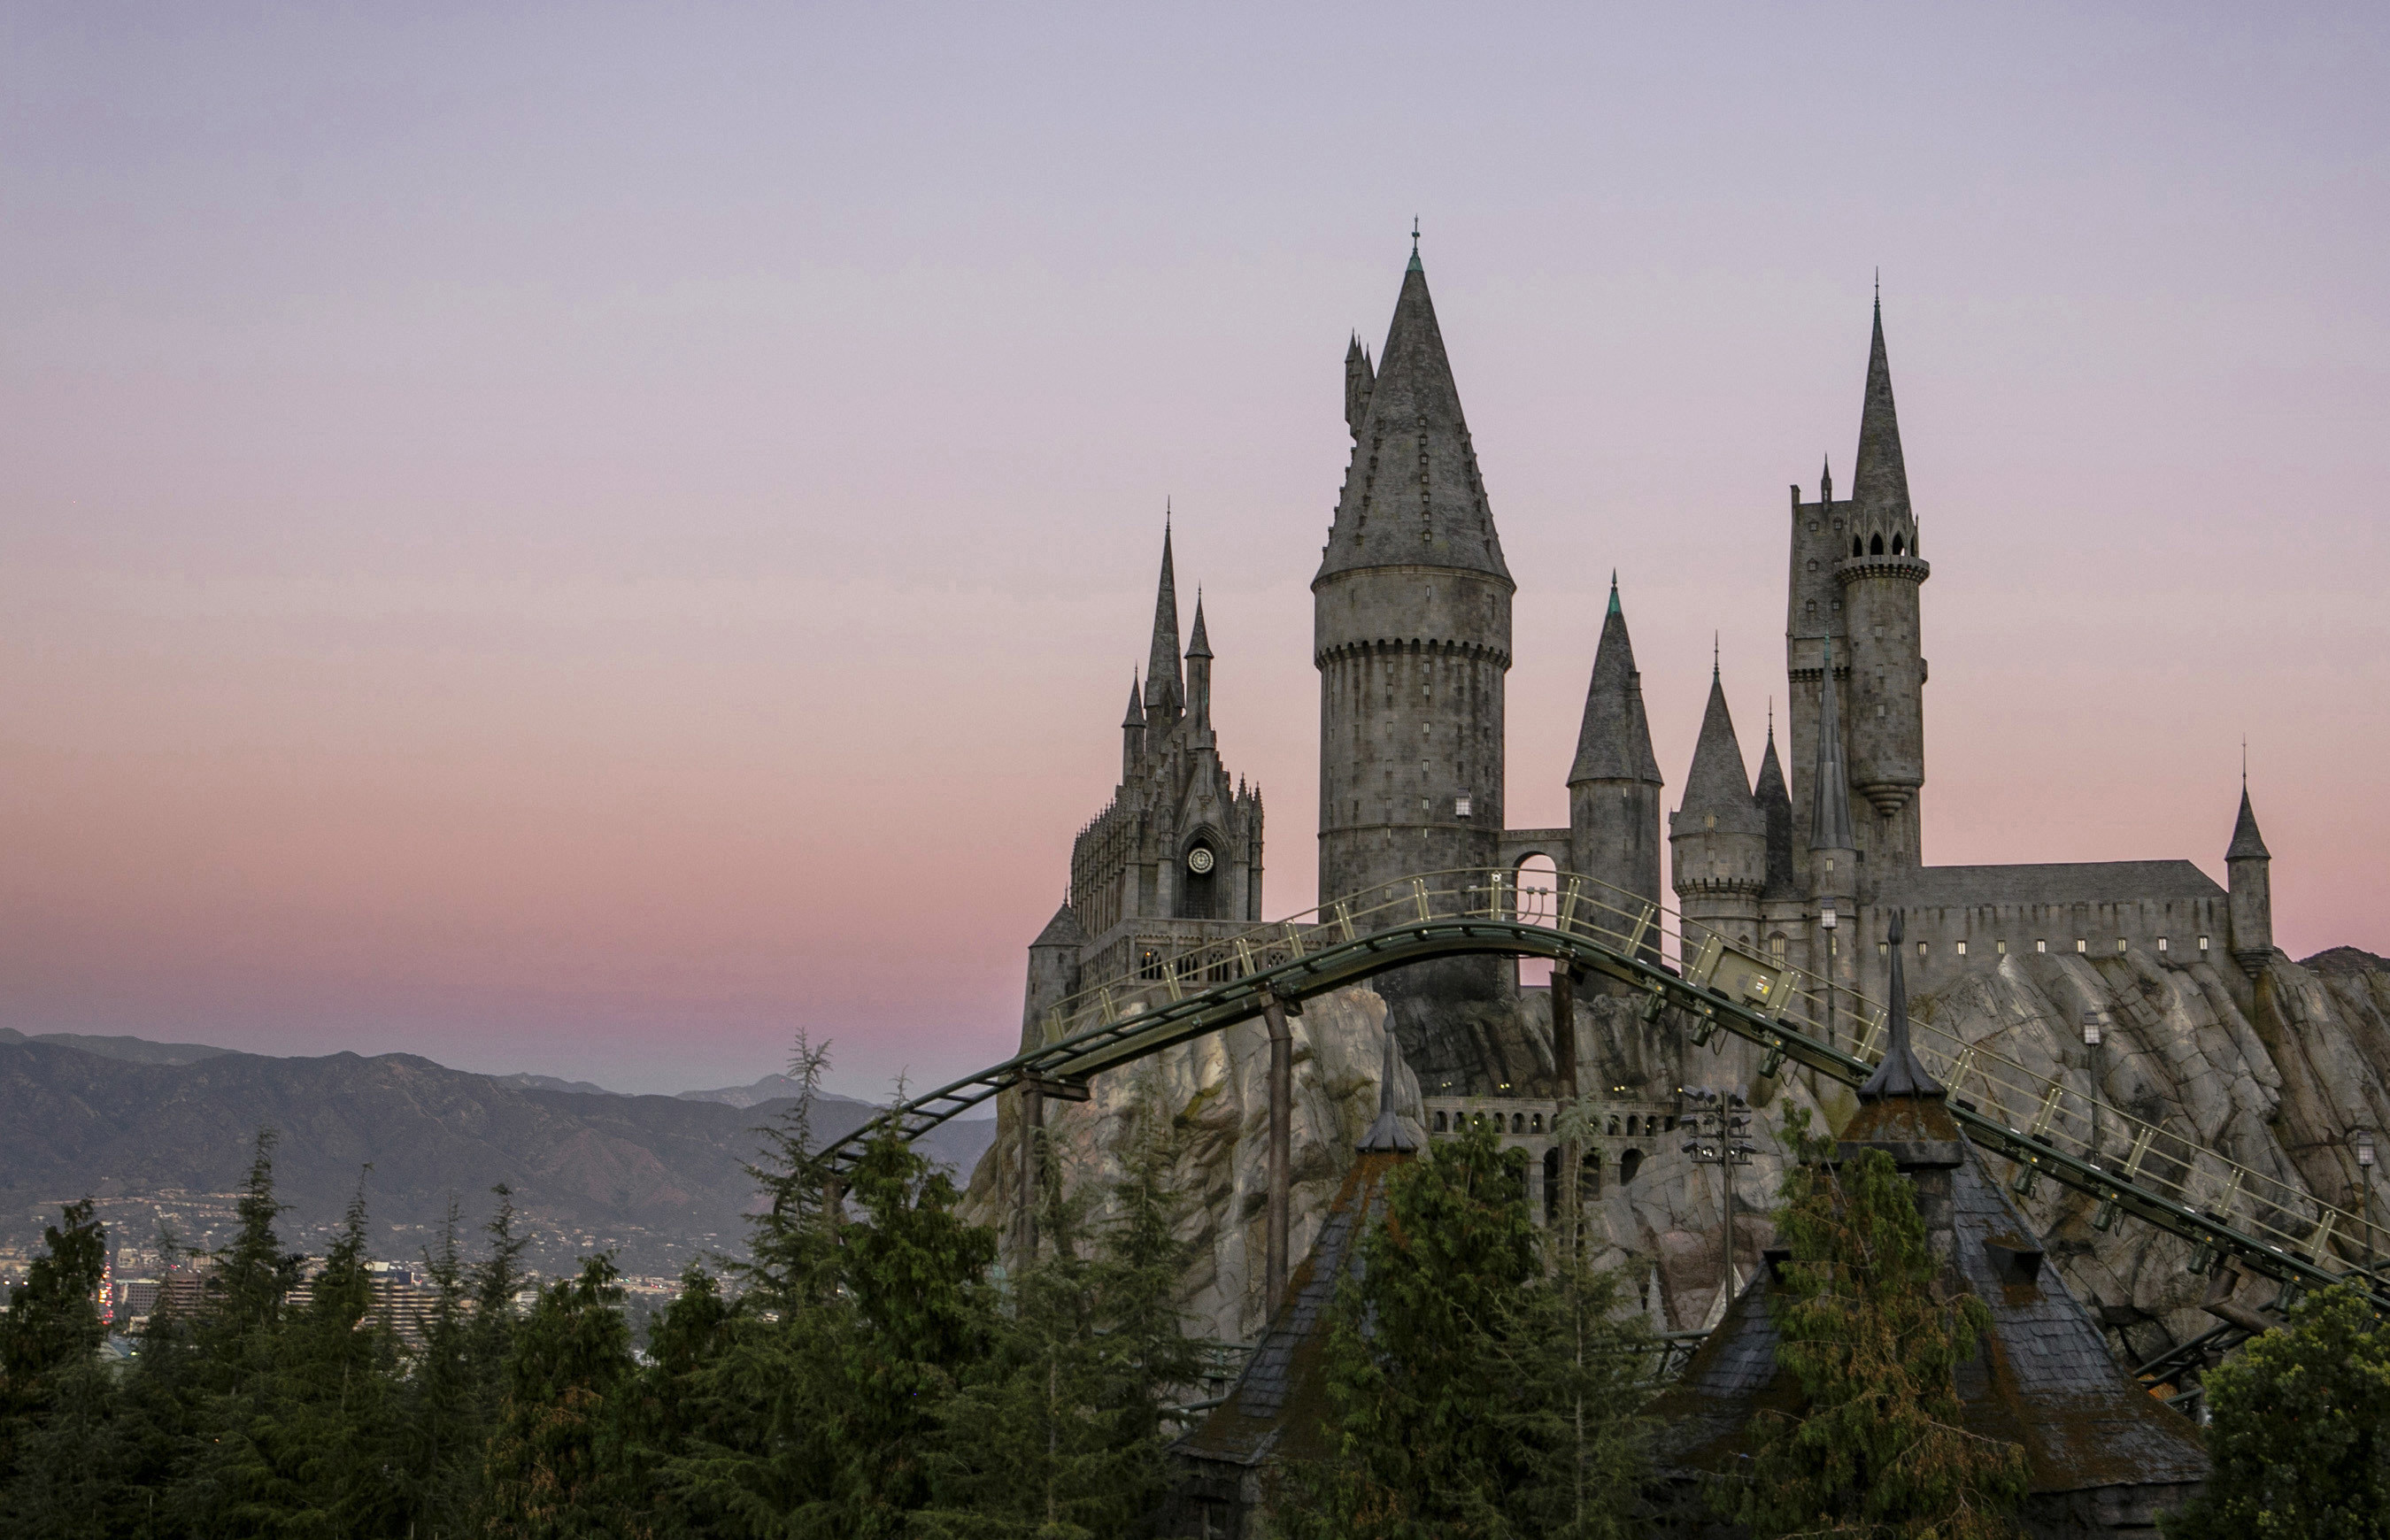 Wizarding World of Harry Potter Opens With Steven Spielberg